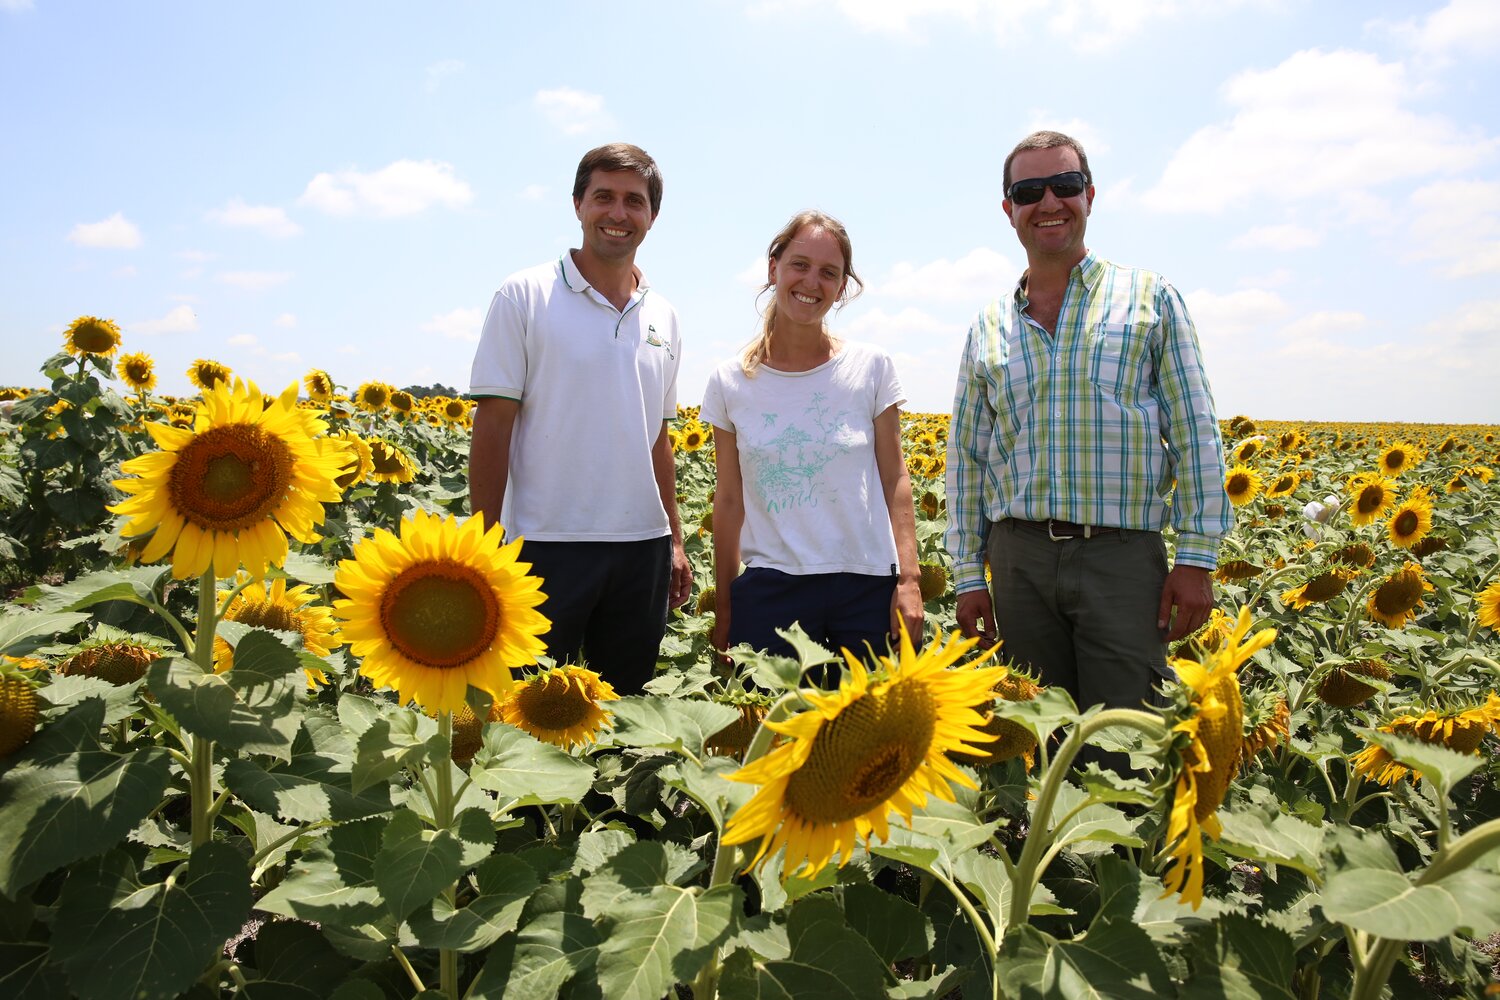 Day 3: In Coronel Suarez, we visited “El Cencerro”, a small, family-run company that has, since 1981, been developing its niche position in the highly competitive sunflower seed market. El Cencerro prioritizes research and investment in new technologies, including new seeds. It is a steadfast collaborator of INTA. Pictured left to right: Ignacio Ducos, Aldana Alonso and Alejandro Holzmann, key members of the management team. 